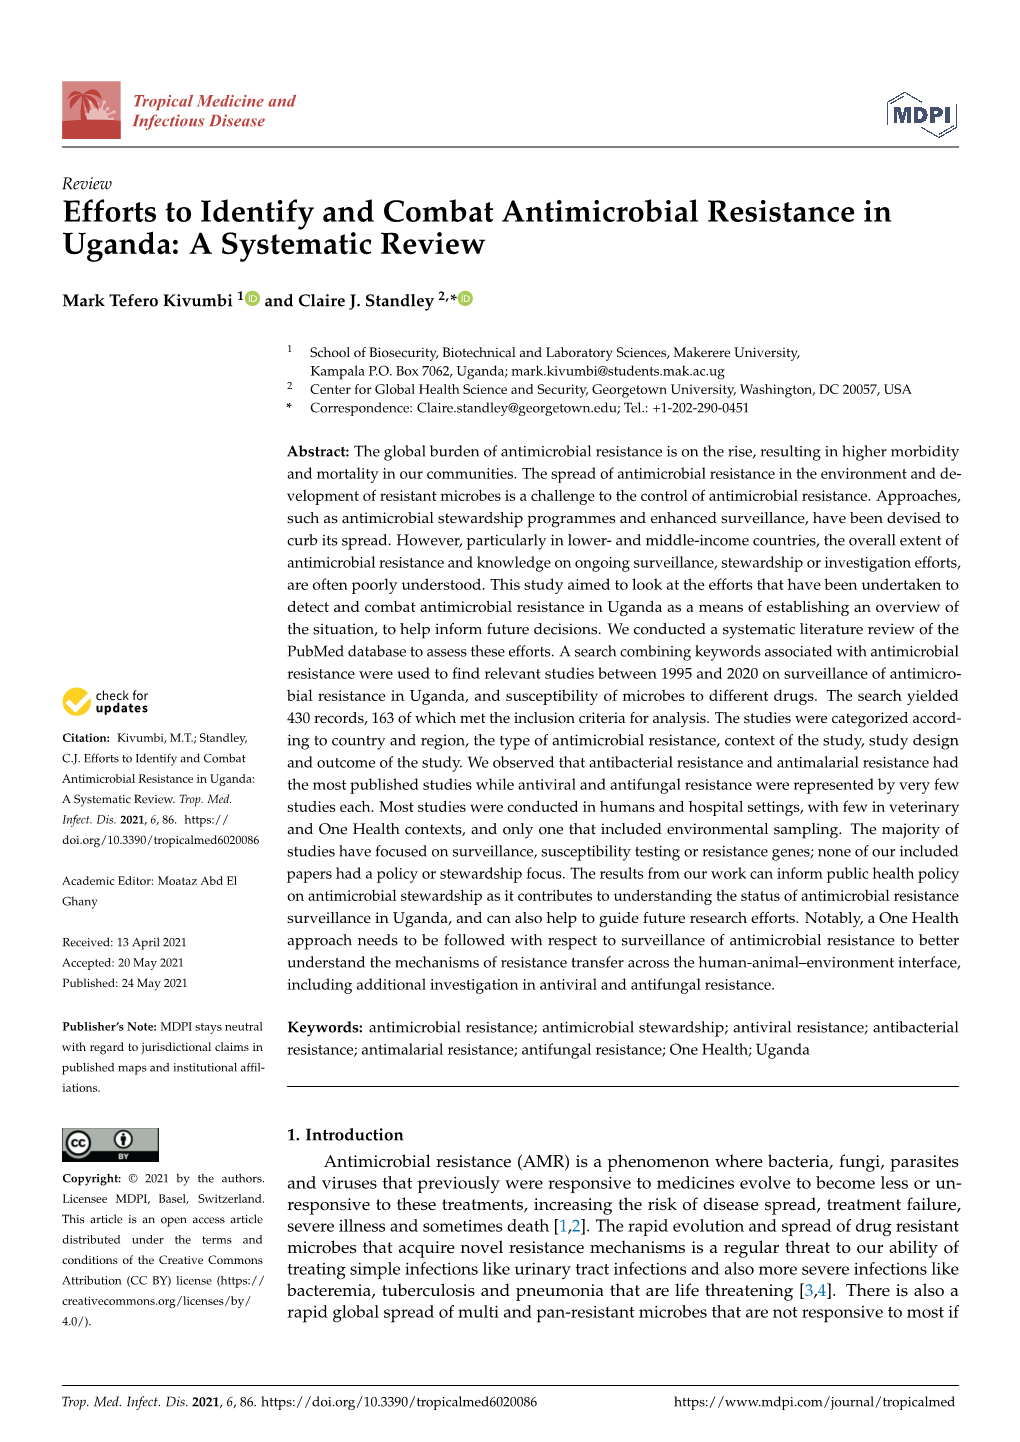 Efforts to Identify and Combat Antimicrobial Resistance in Uganda: a Systematic Review